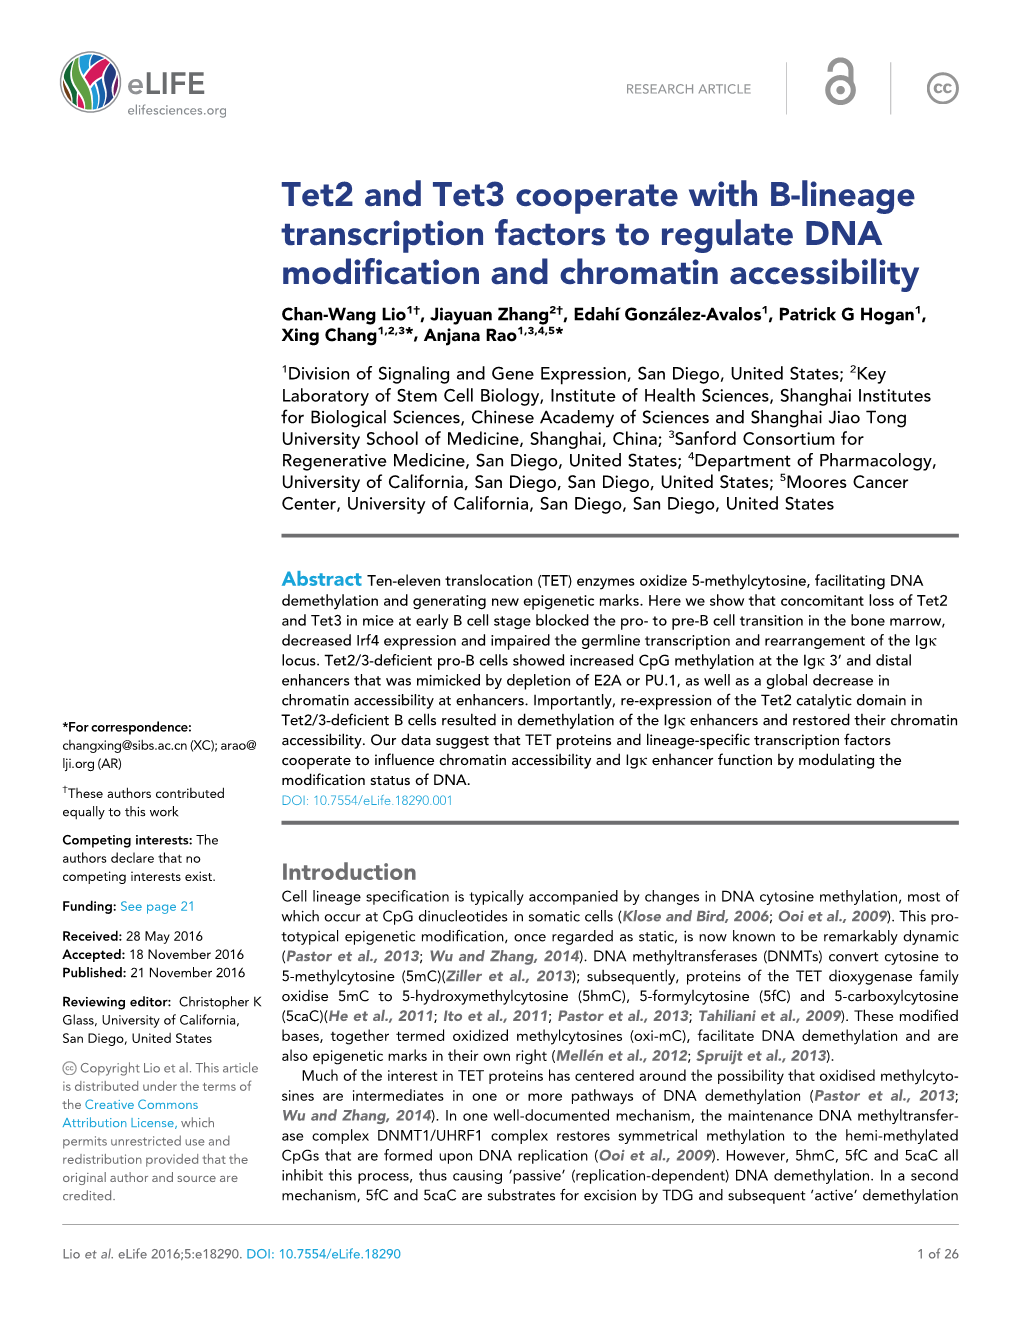 Tet2 and Tet3 Cooperate with B-Lineage Transcription Factors To